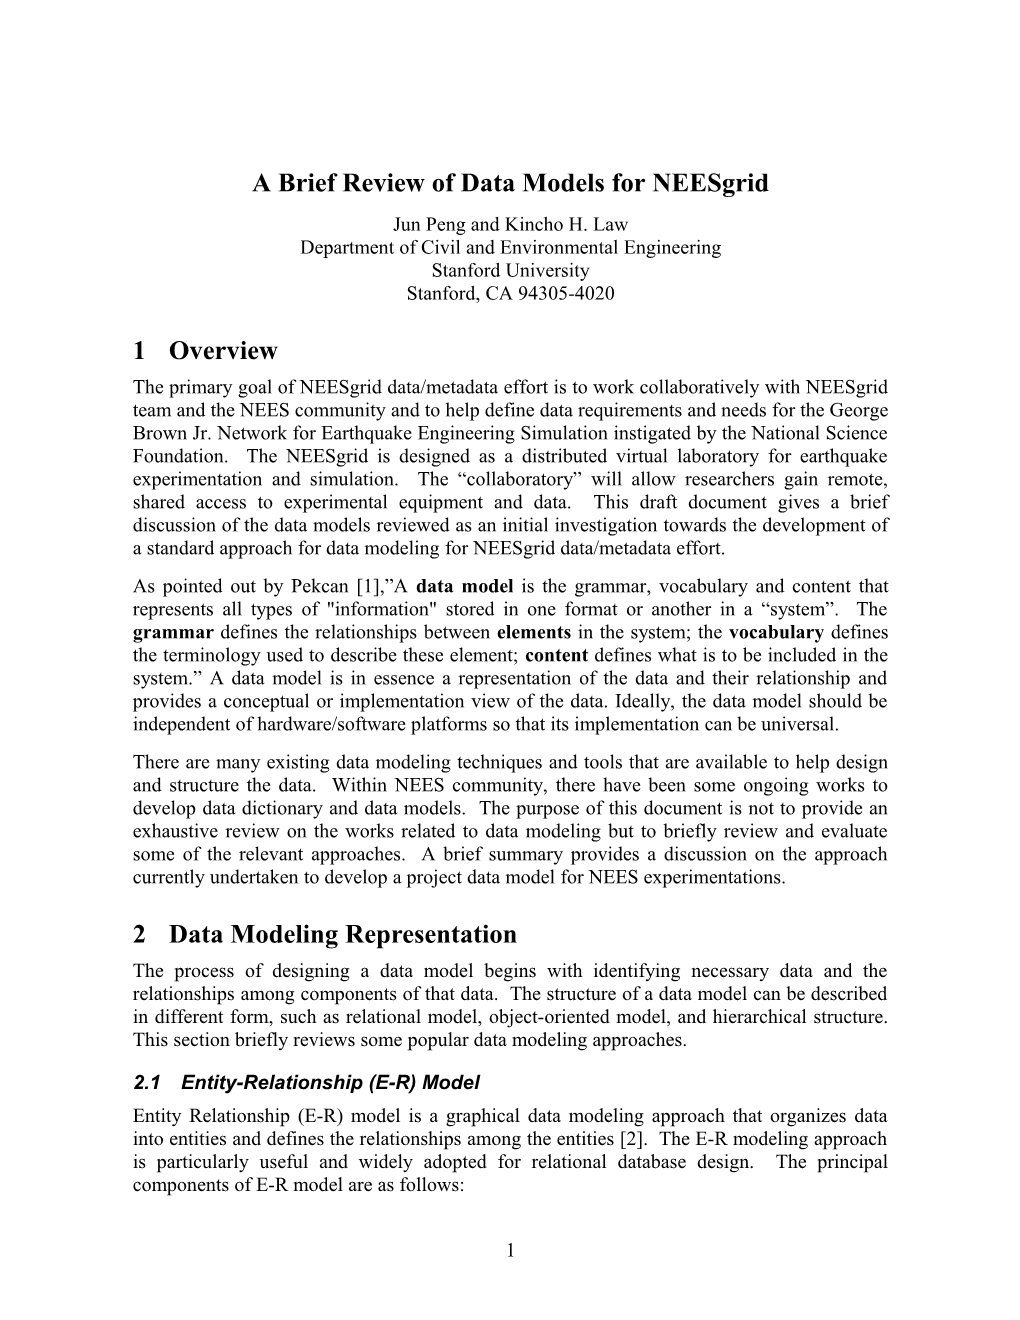 Summary Review of Data Models